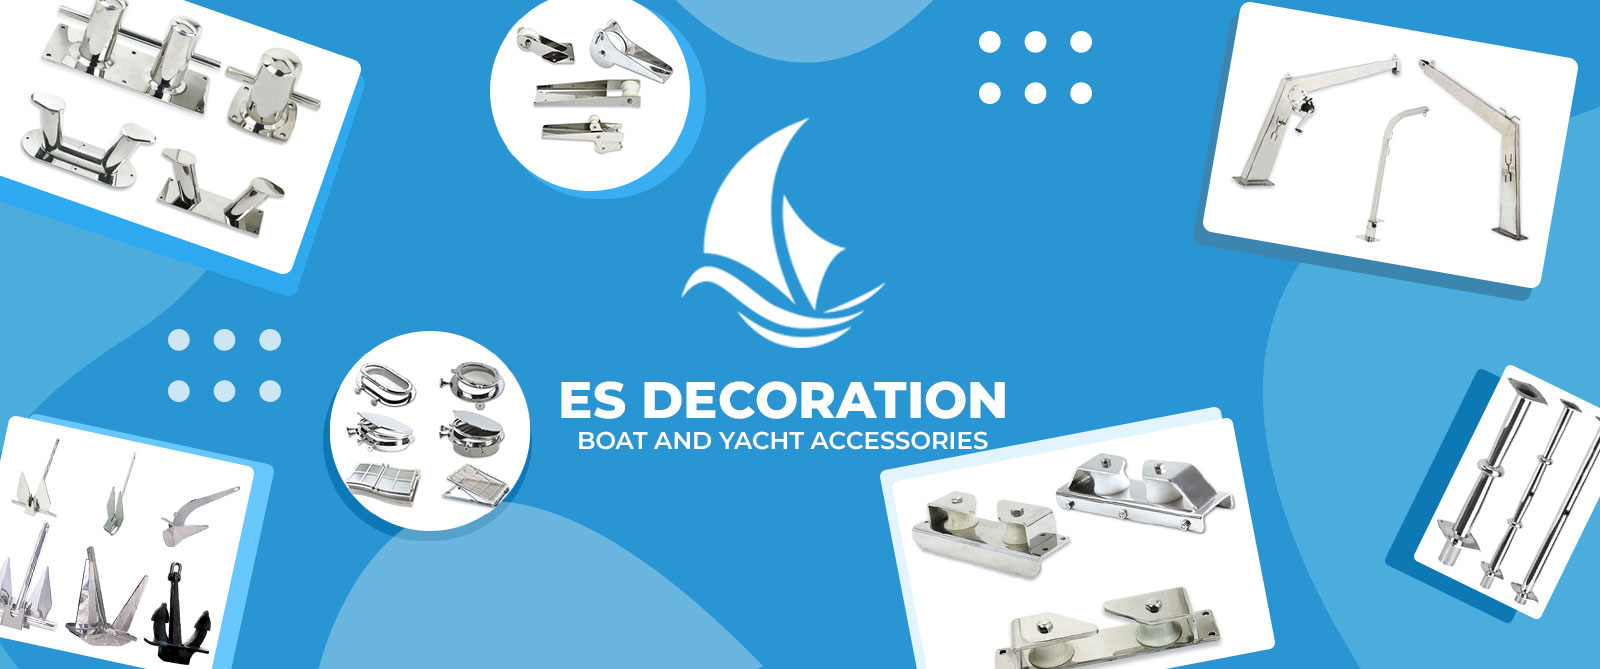 ES DECORATION - Boat and Yacht Accessories